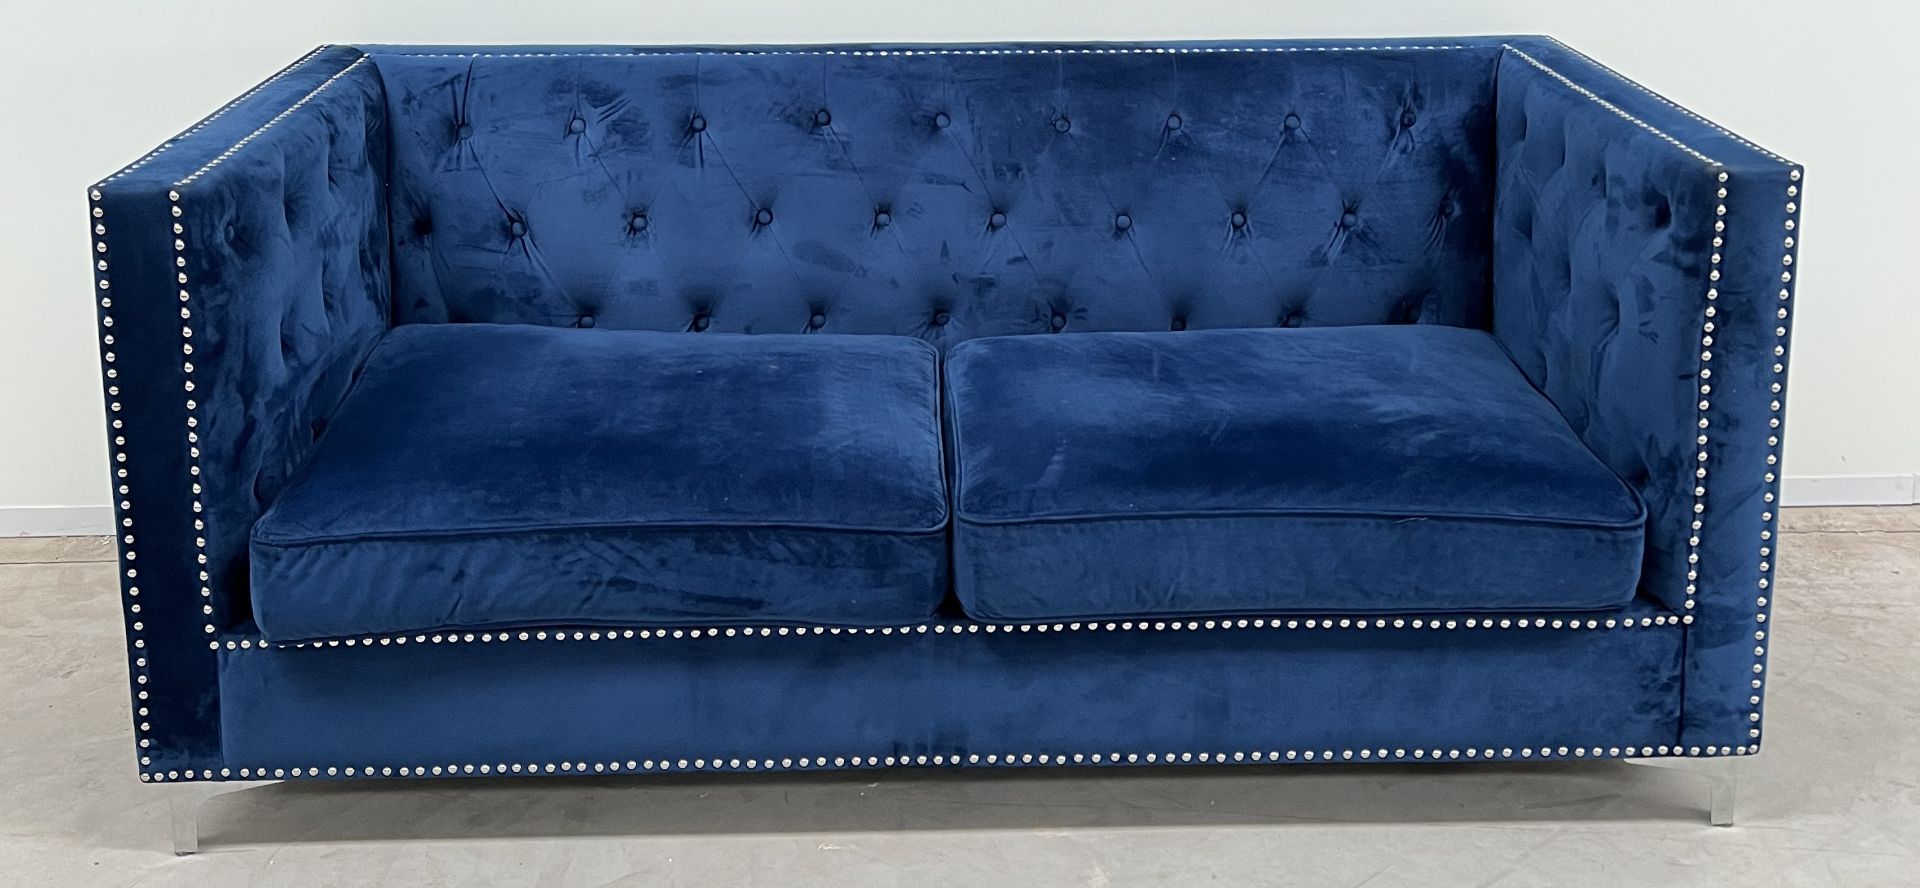 New York Blue Velvet 3 Seater Sofa The New York Collection Gives A Modern Twist On The - Image 2 of 3